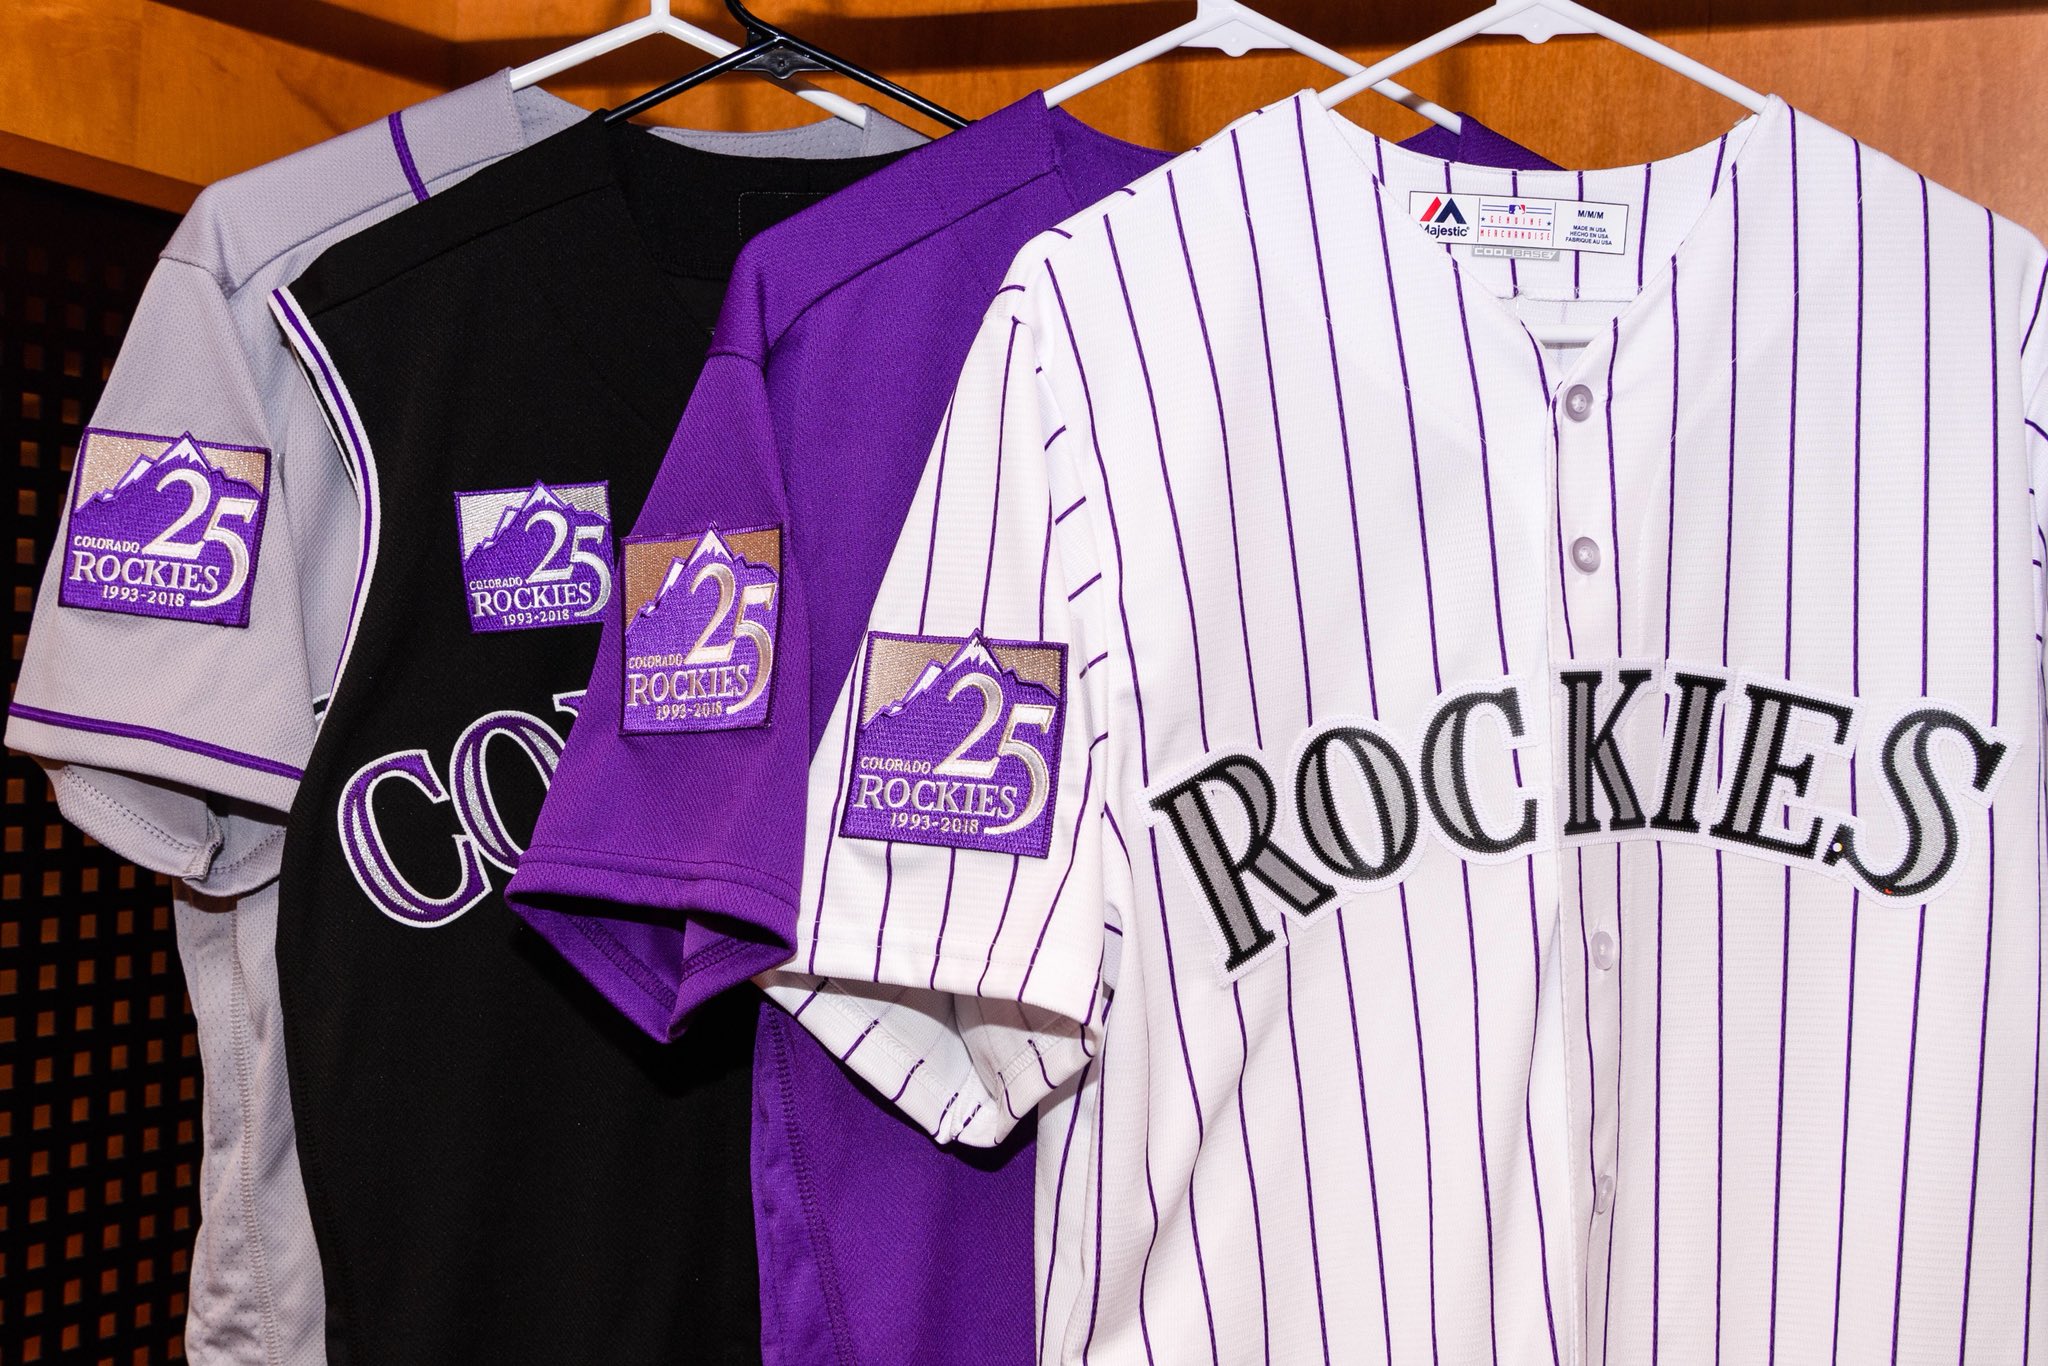 Colorado Rockies on Twitter: Gear up for the #Rockies25th with